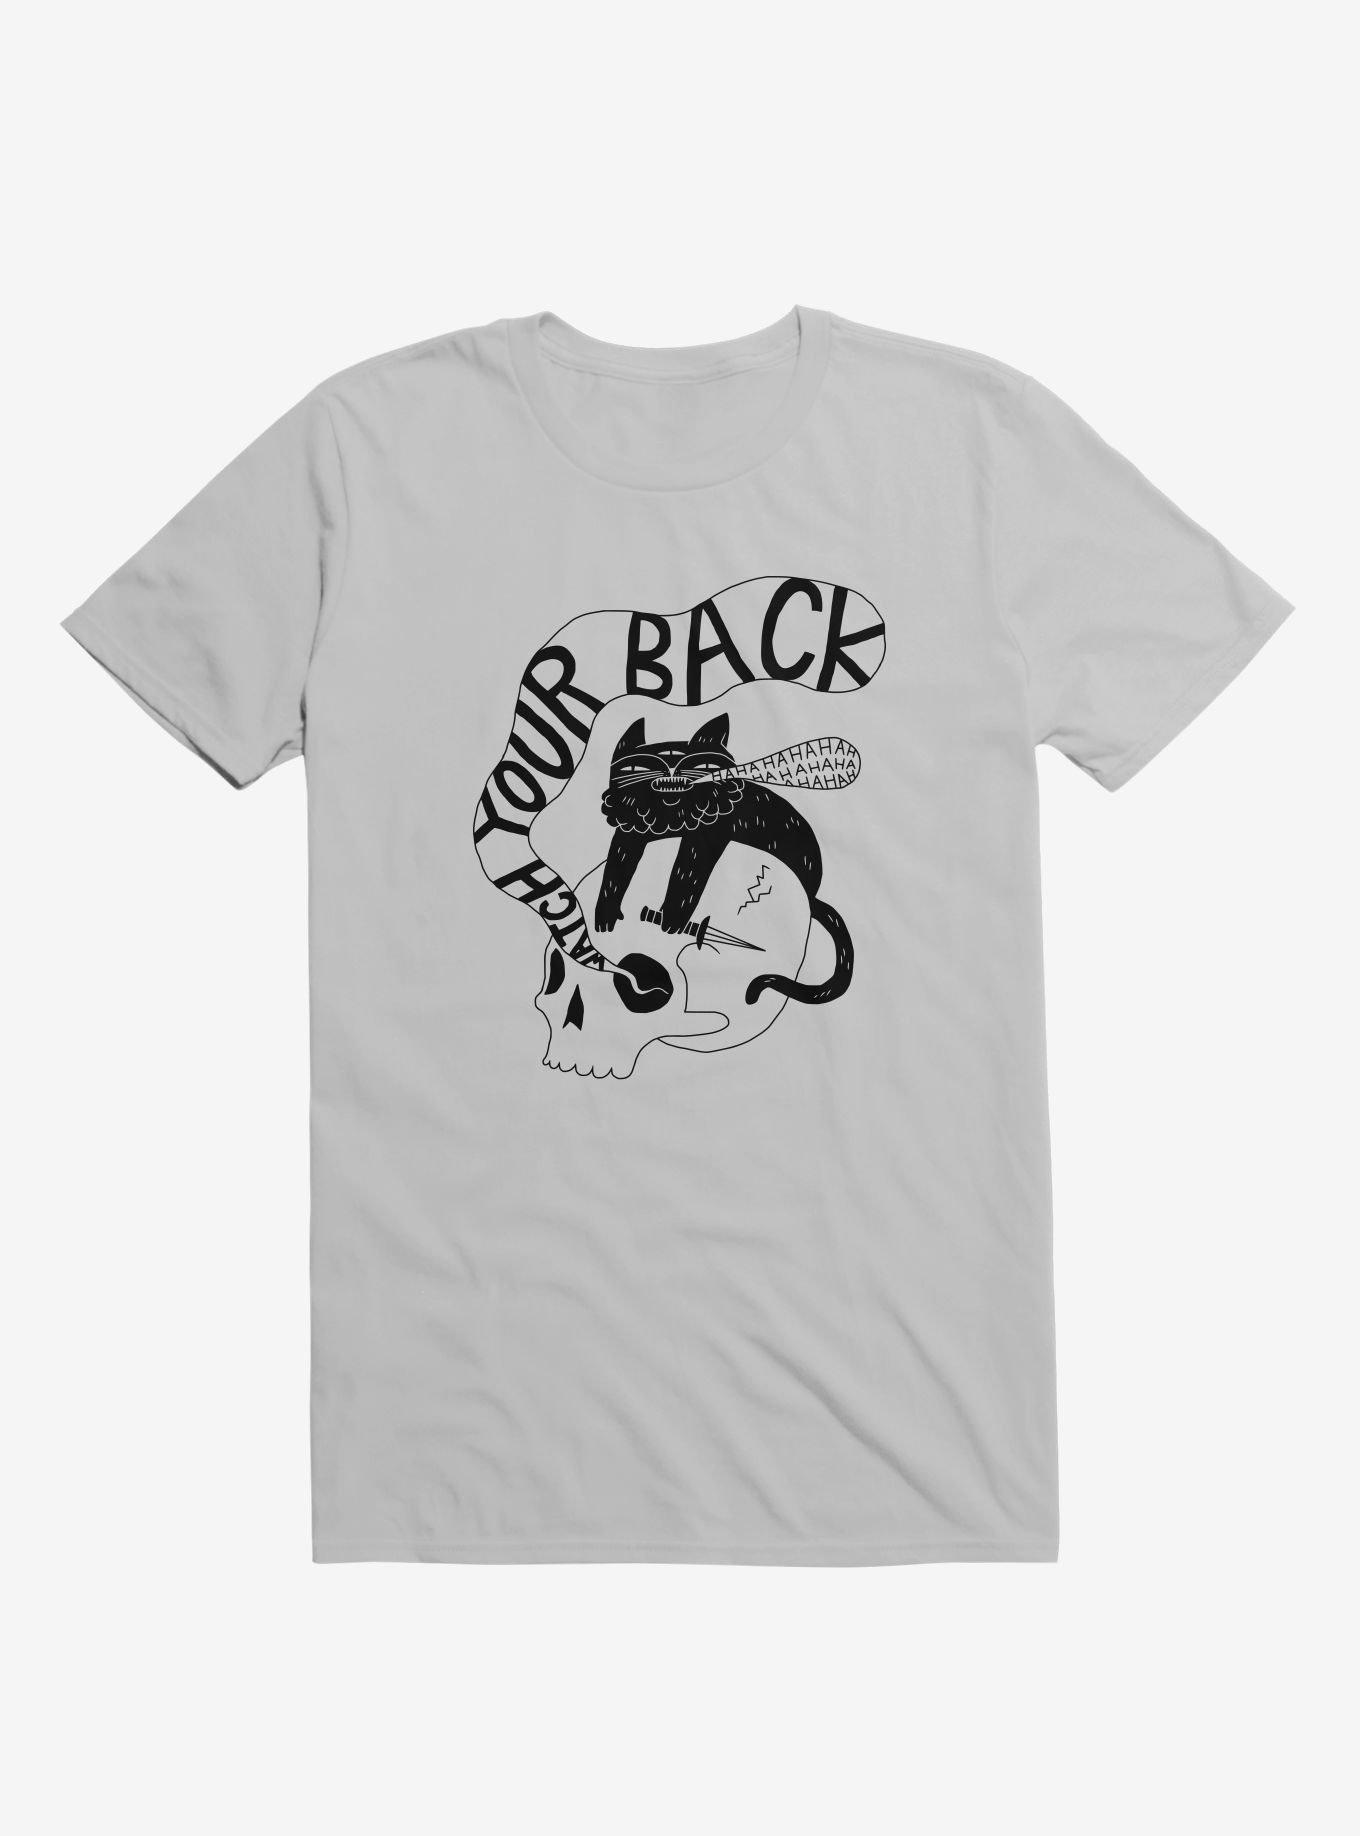 Watch Your Back Silver T-Shirt, SILVER, hi-res